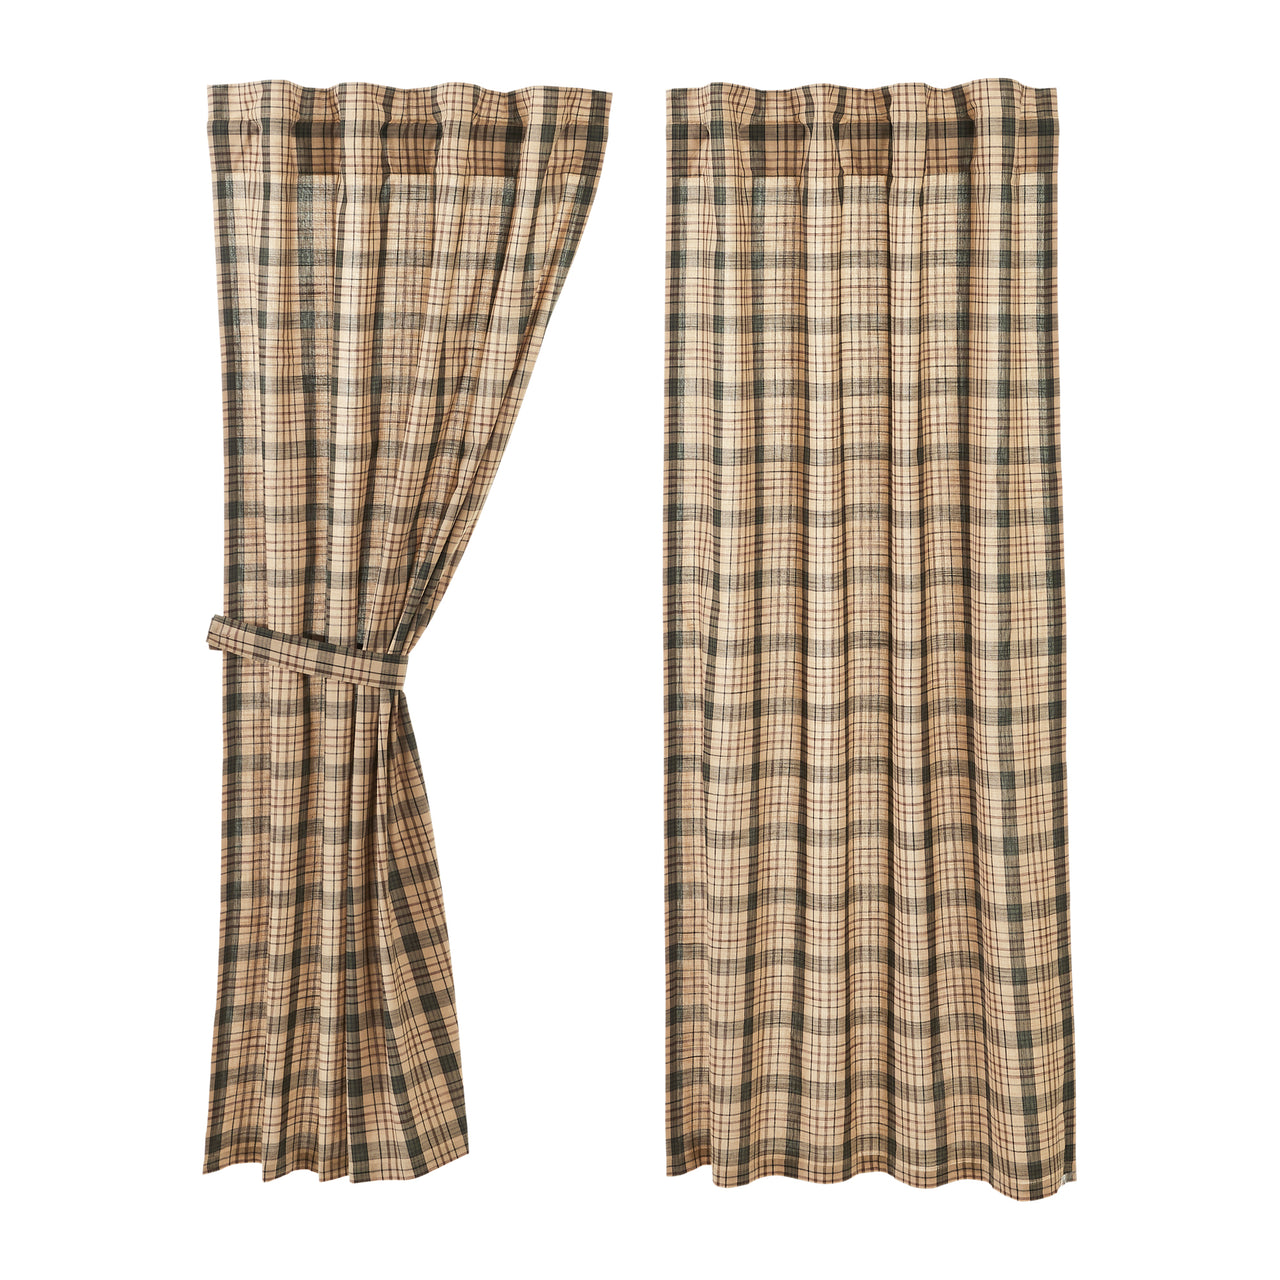 Cider Mill Plaid Short Panel Curtain Set of 2 63x36 VHC Brands